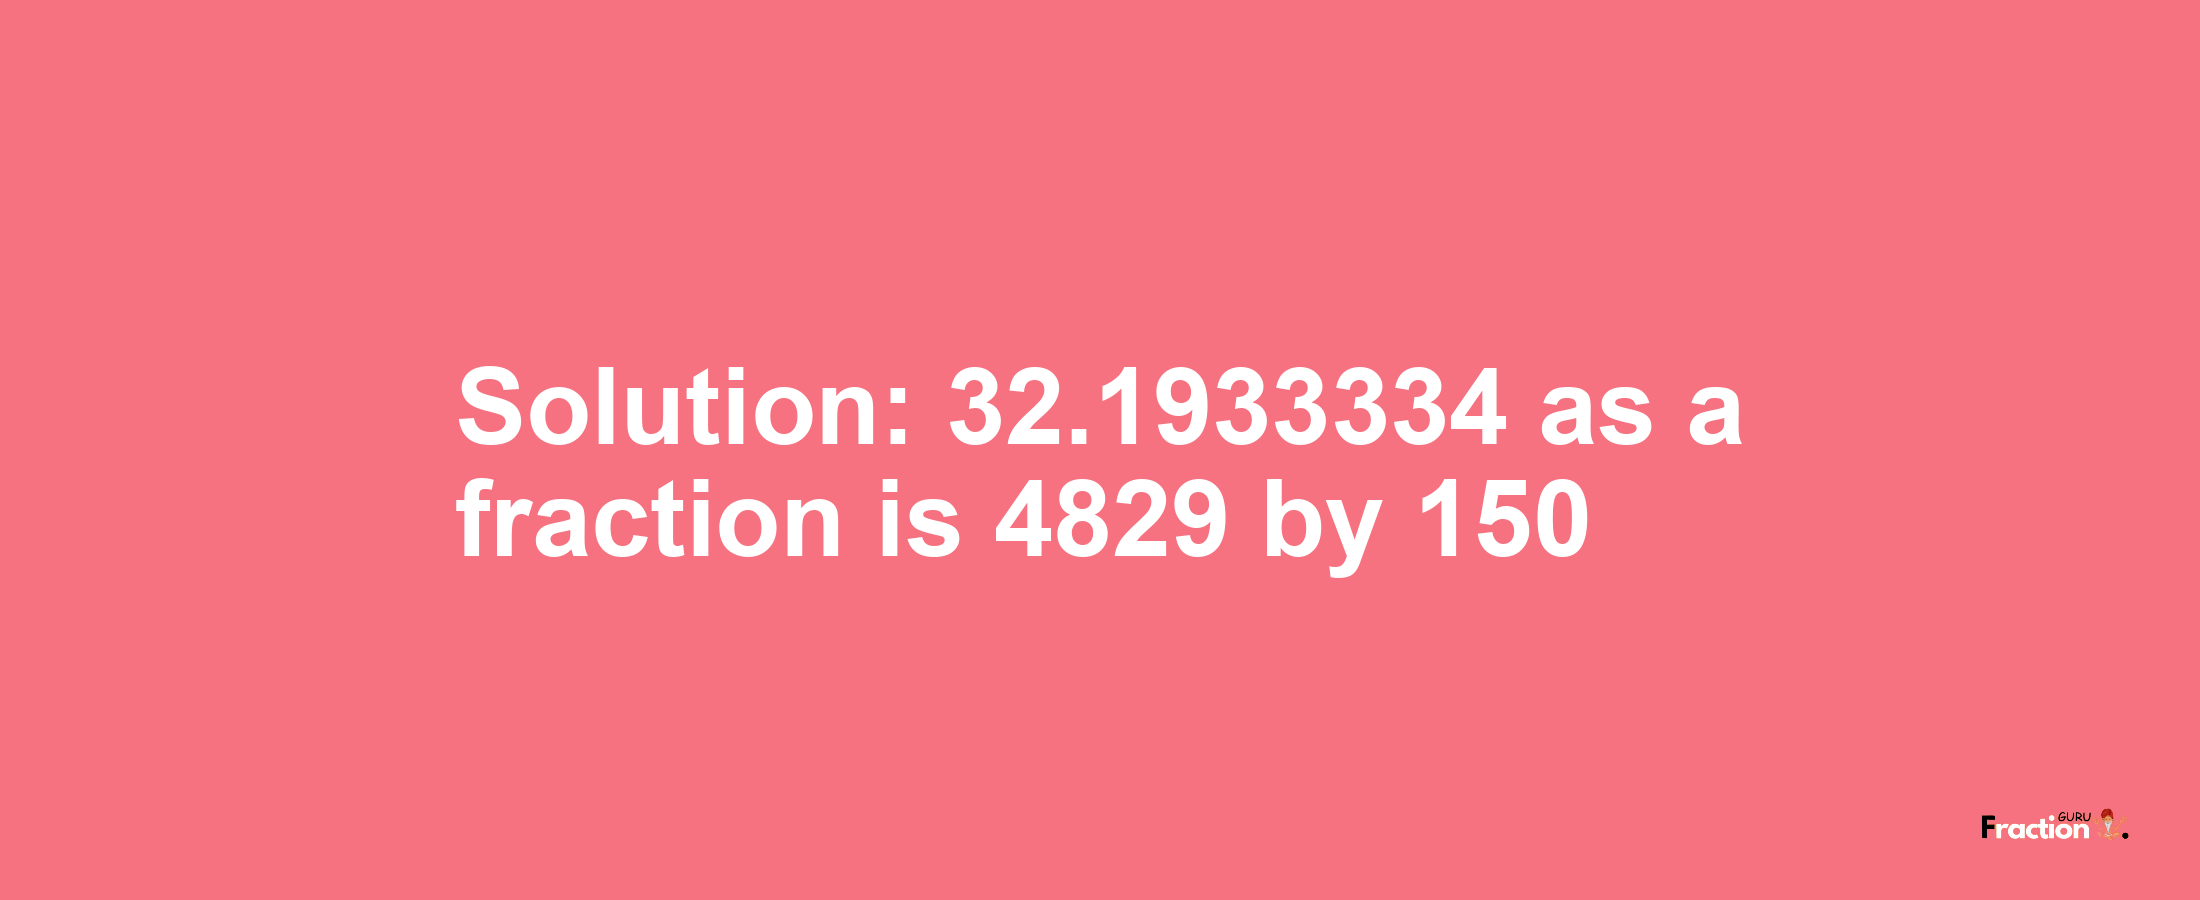 Solution:32.1933334 as a fraction is 4829/150